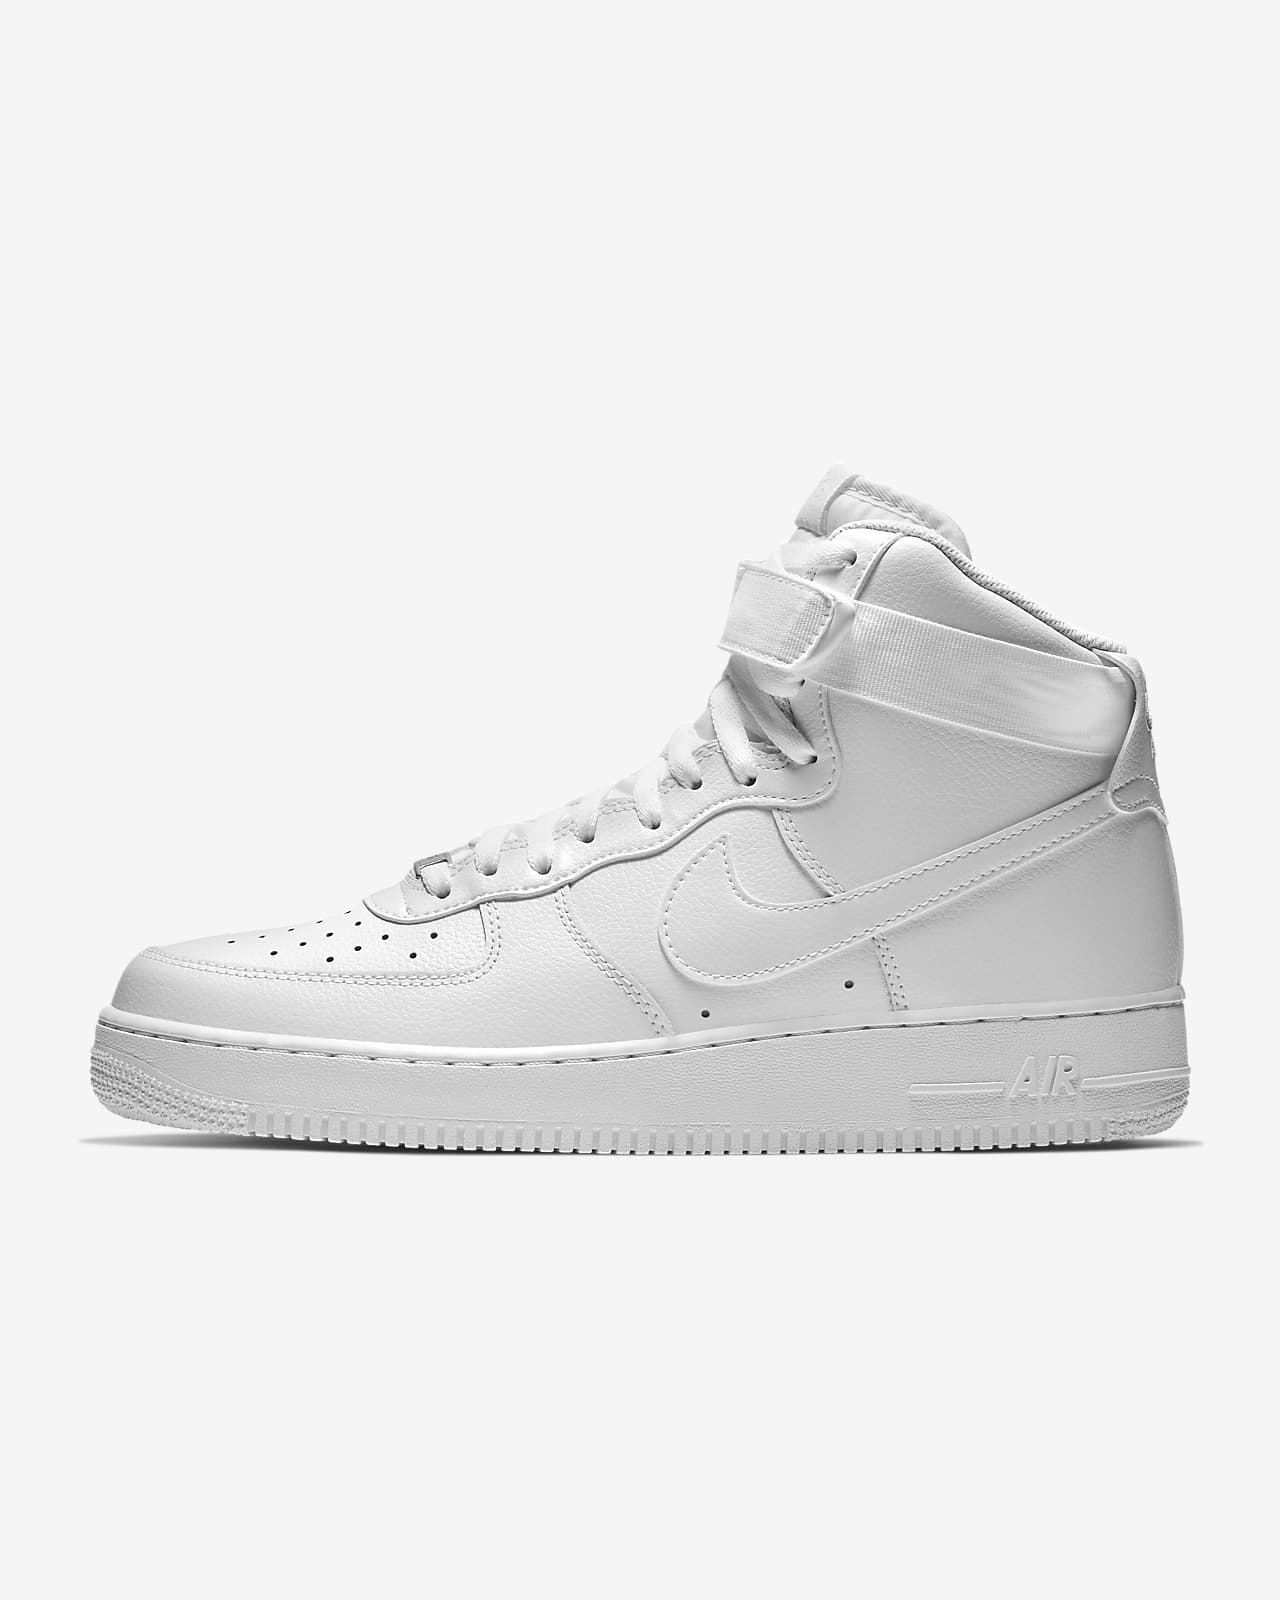 Air Force 1 High '07 Men's Shoes.